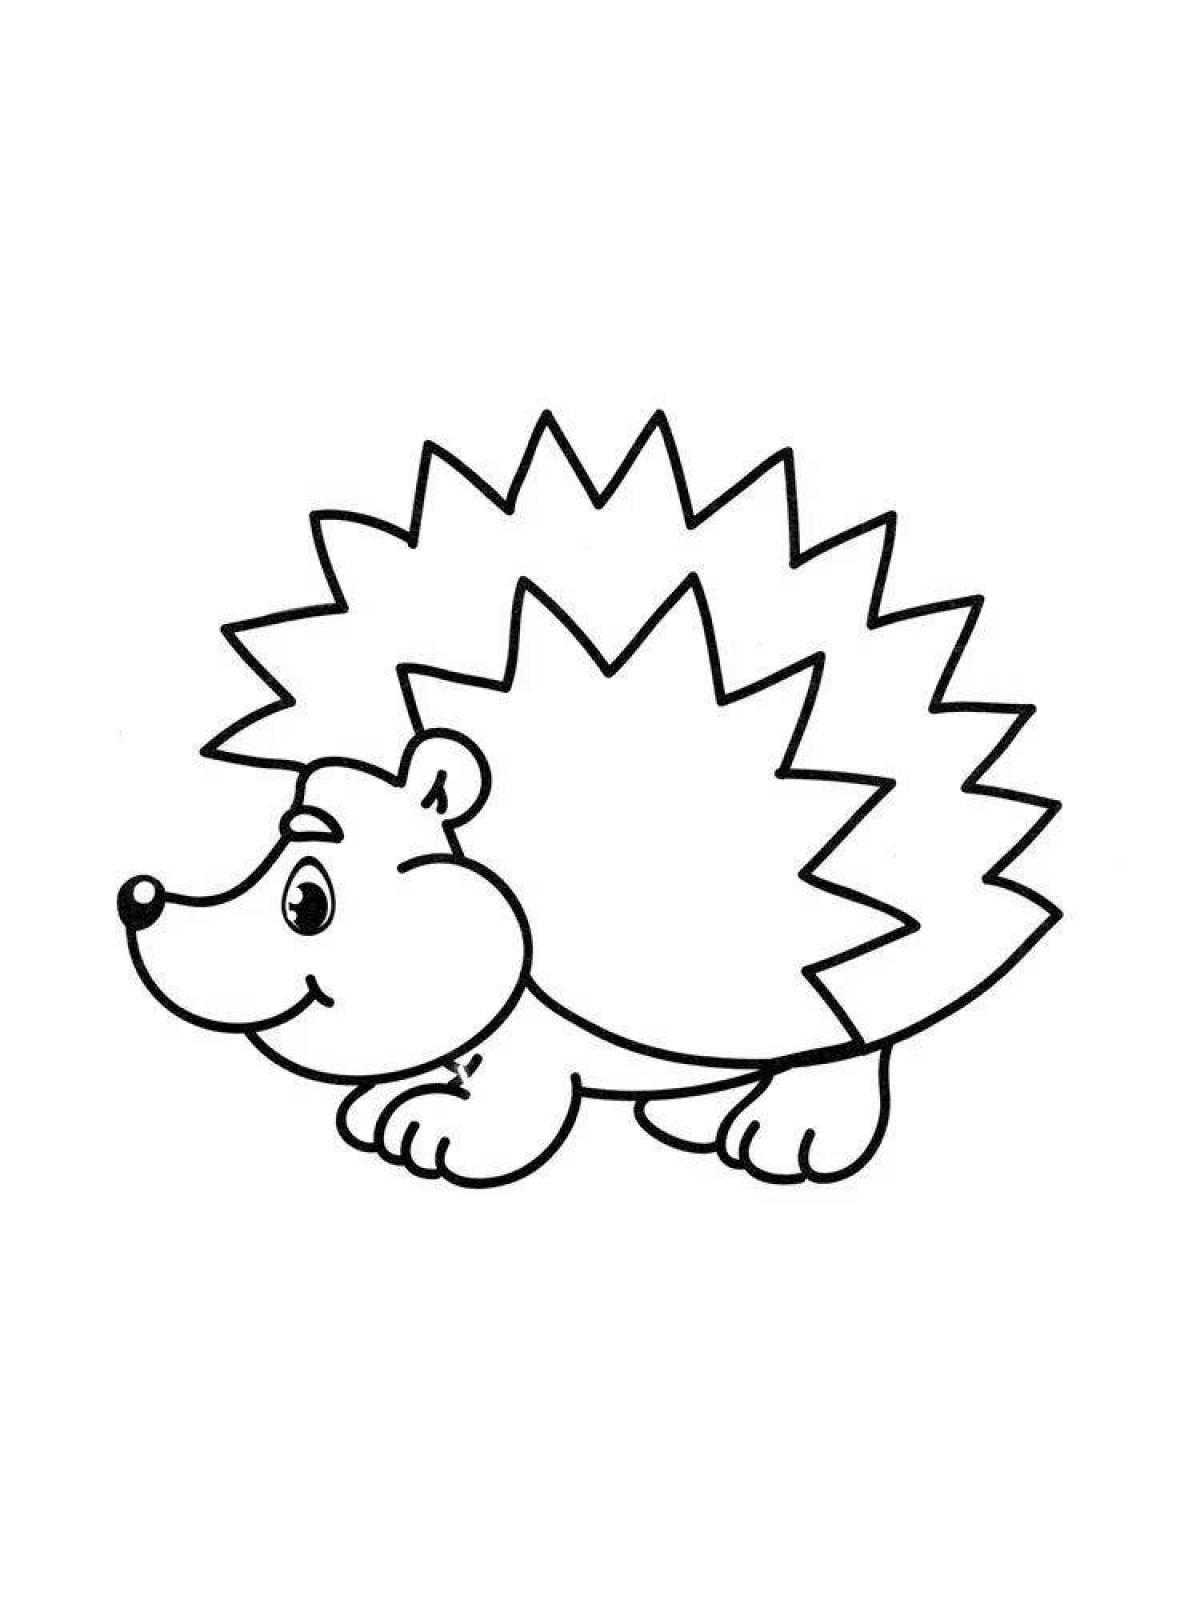 Great drawing of a hedgehog